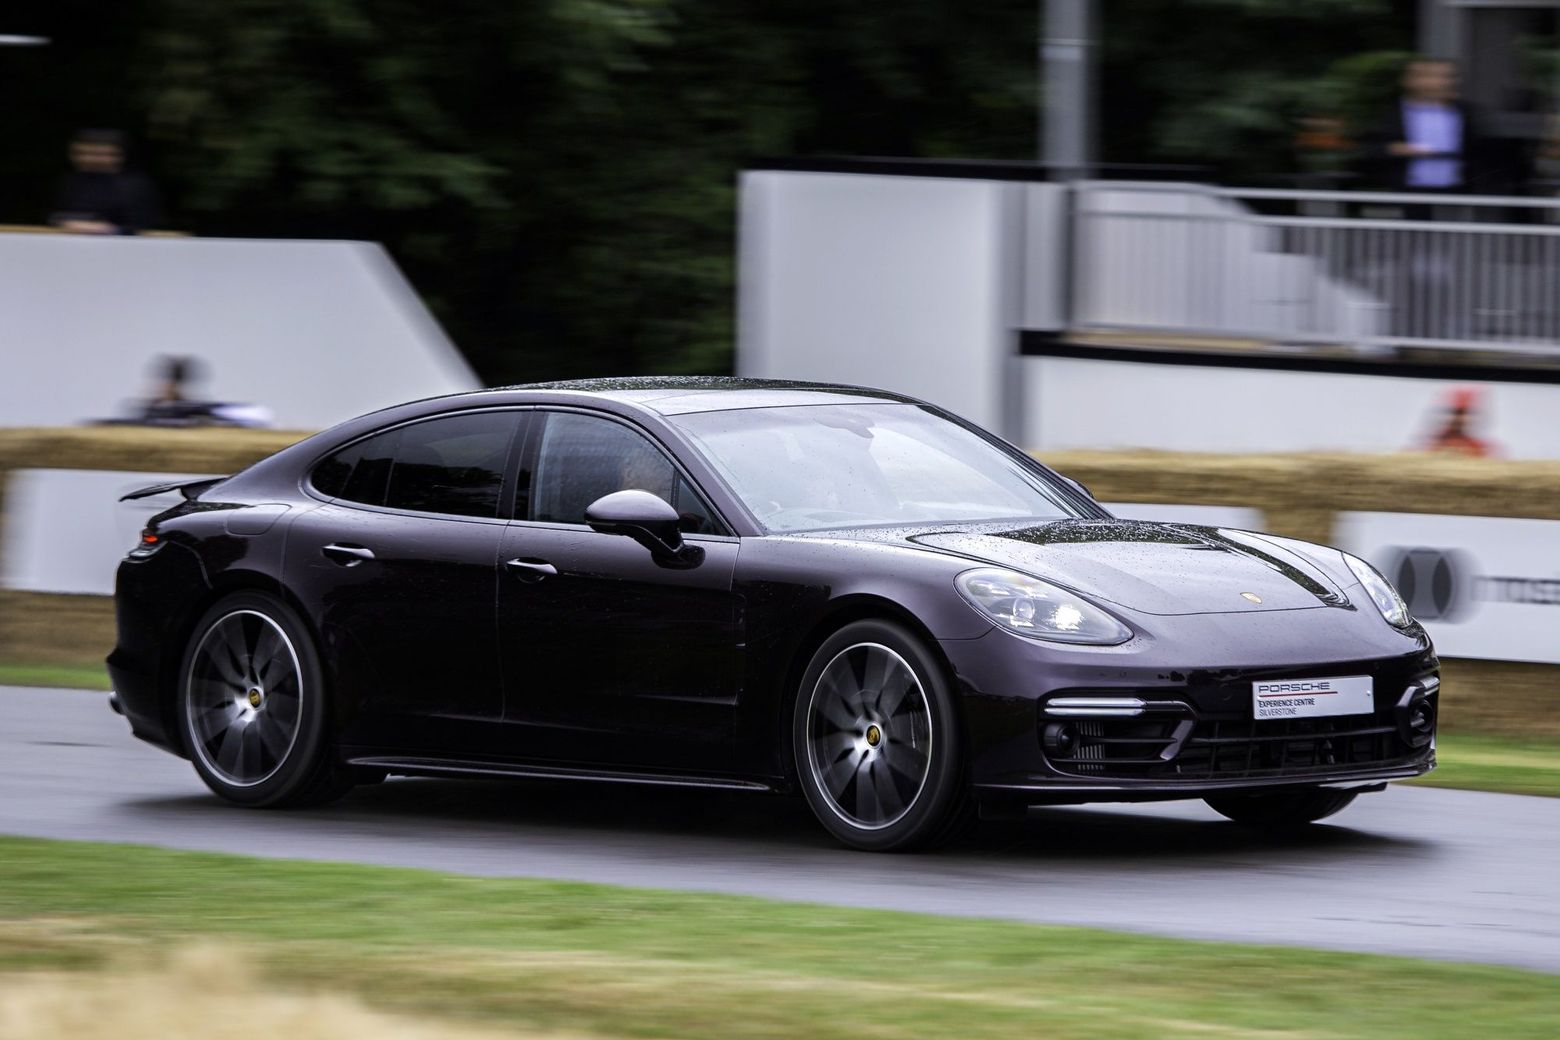 Porsche blunder puts $148,000 sports car on sale for just $18,000